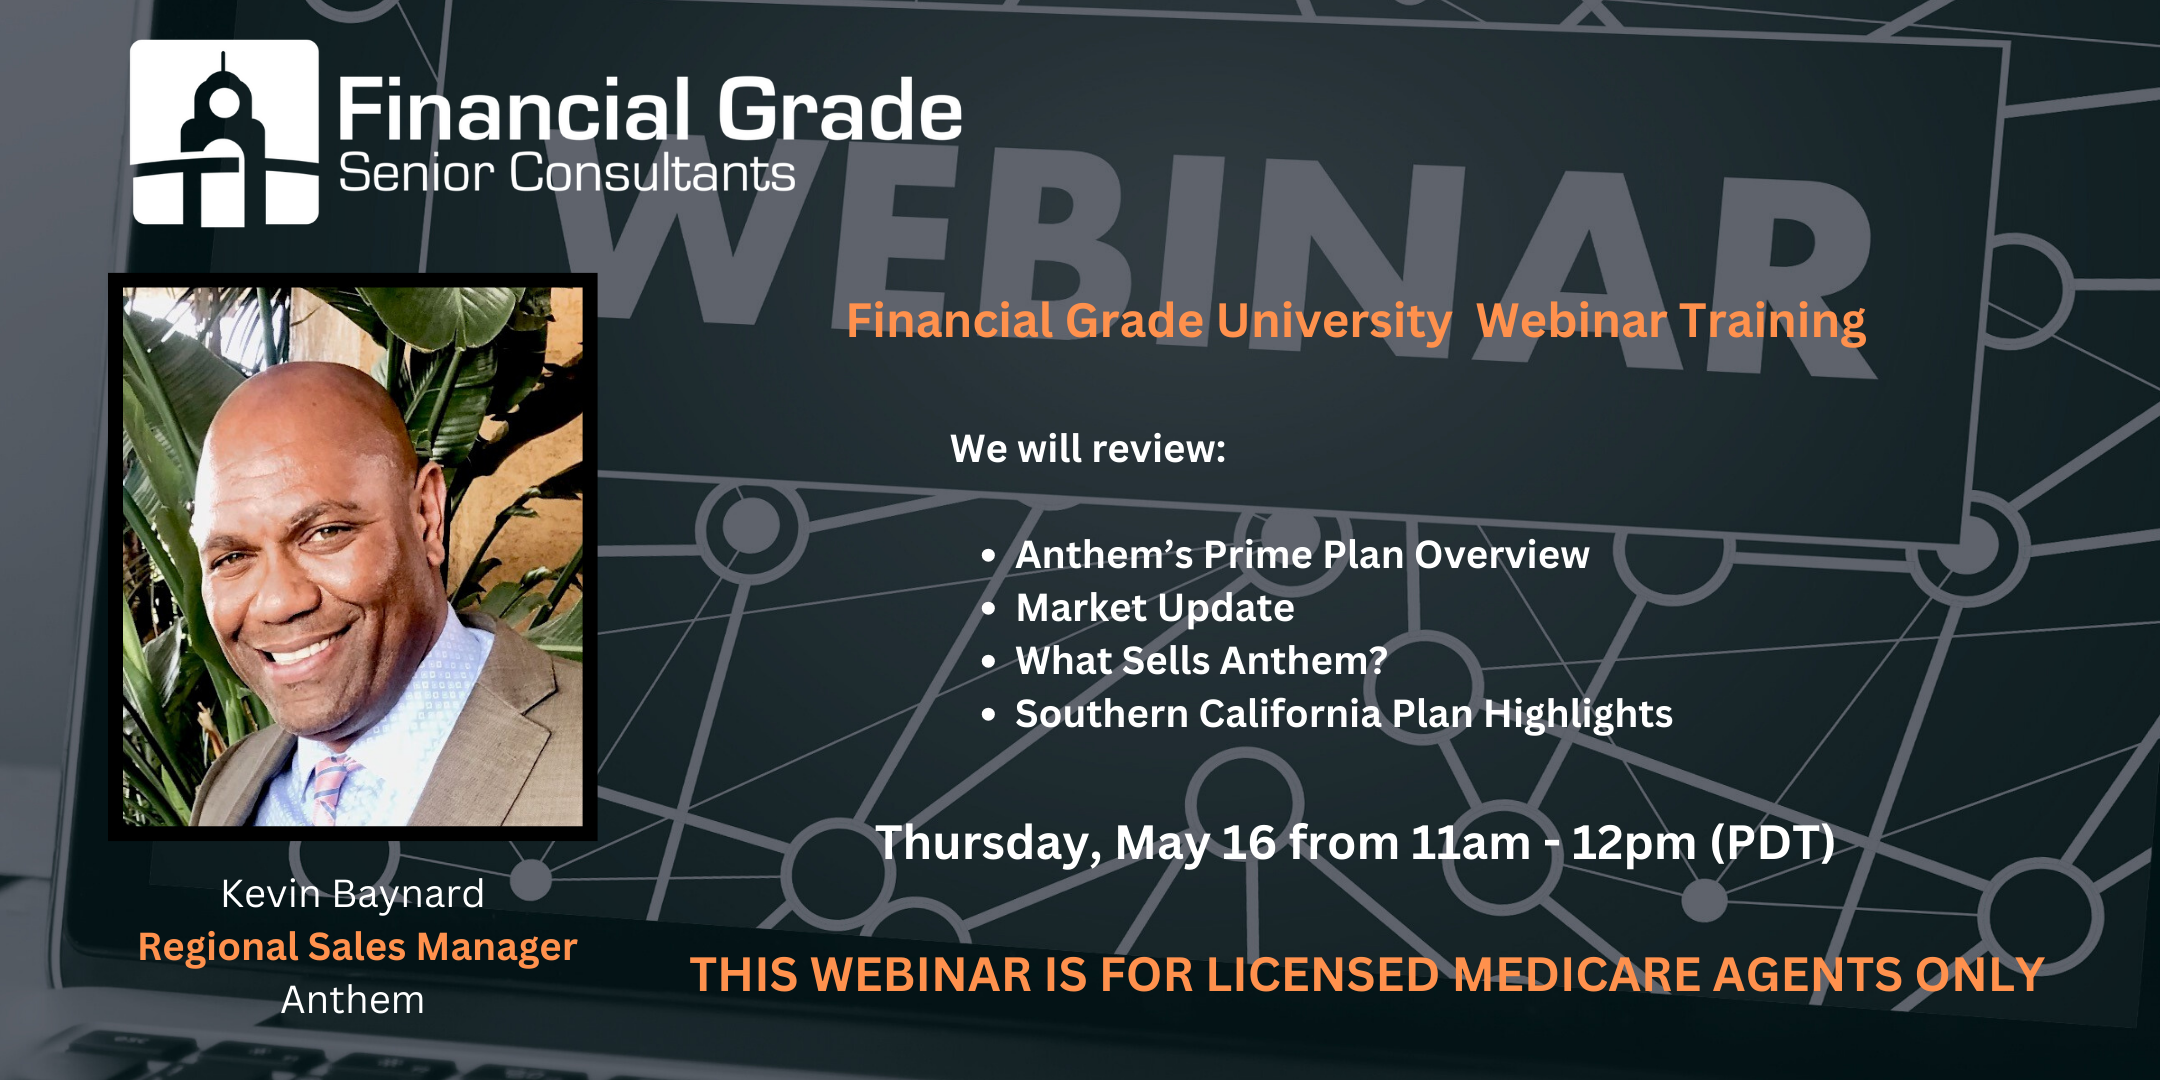 Join Financial Grade Senior Consultants the top FMO for licensed Medicare agents as we invite Anthem to discuss their Medicare Prime Plan. Don't miss this important Medicare agent training webinar!